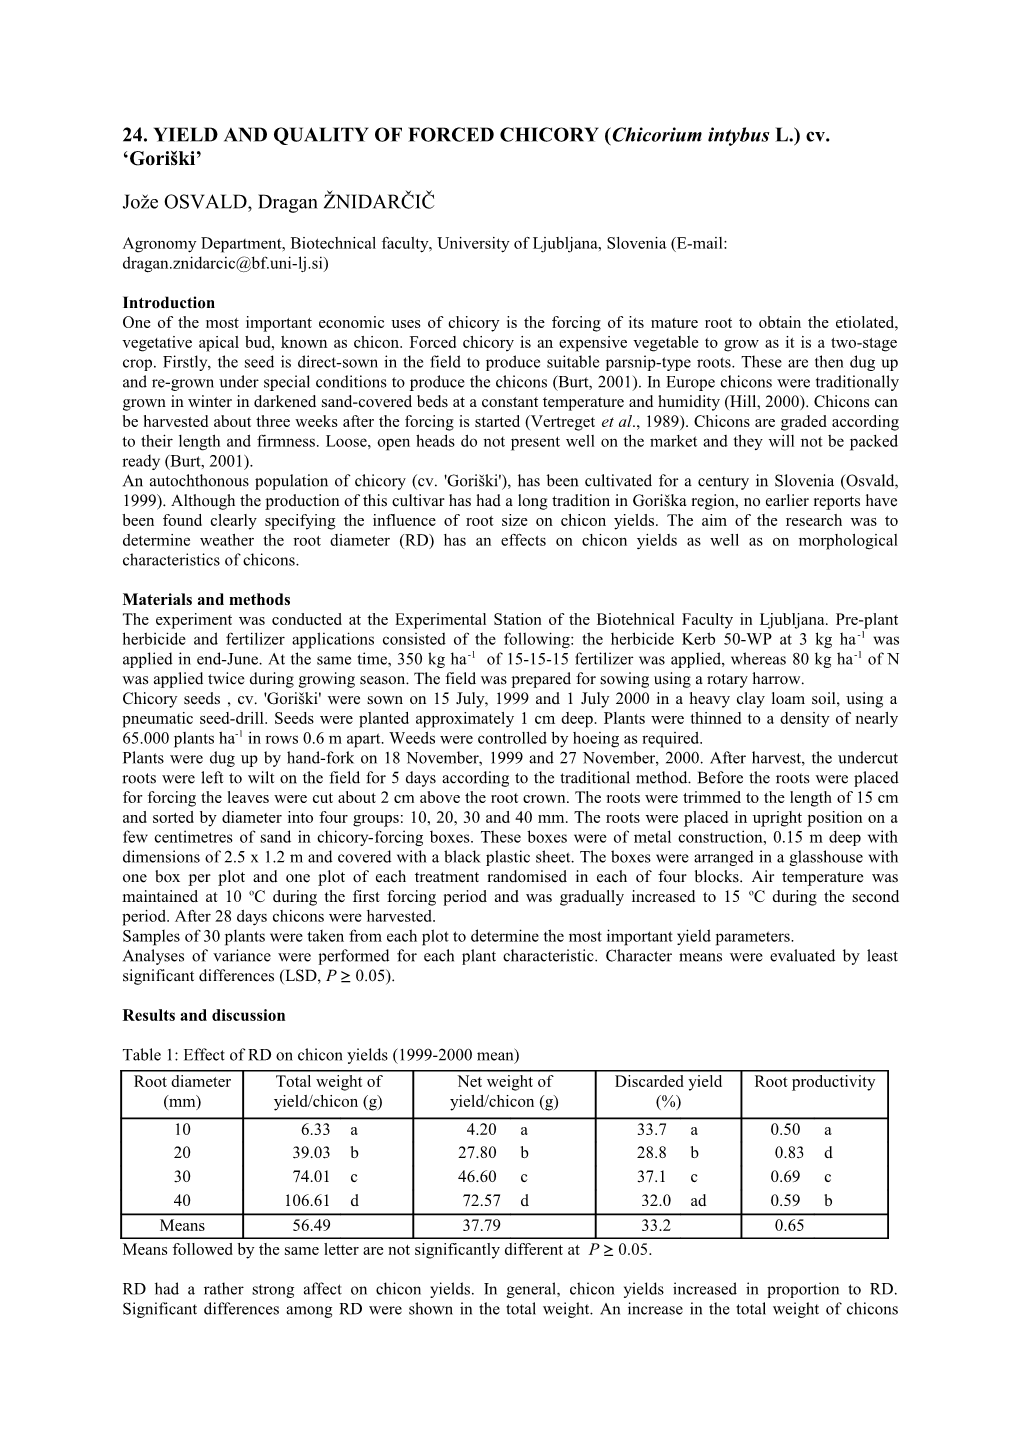 Yield and Quality of Forced Chicory (Chicorium Intybus L